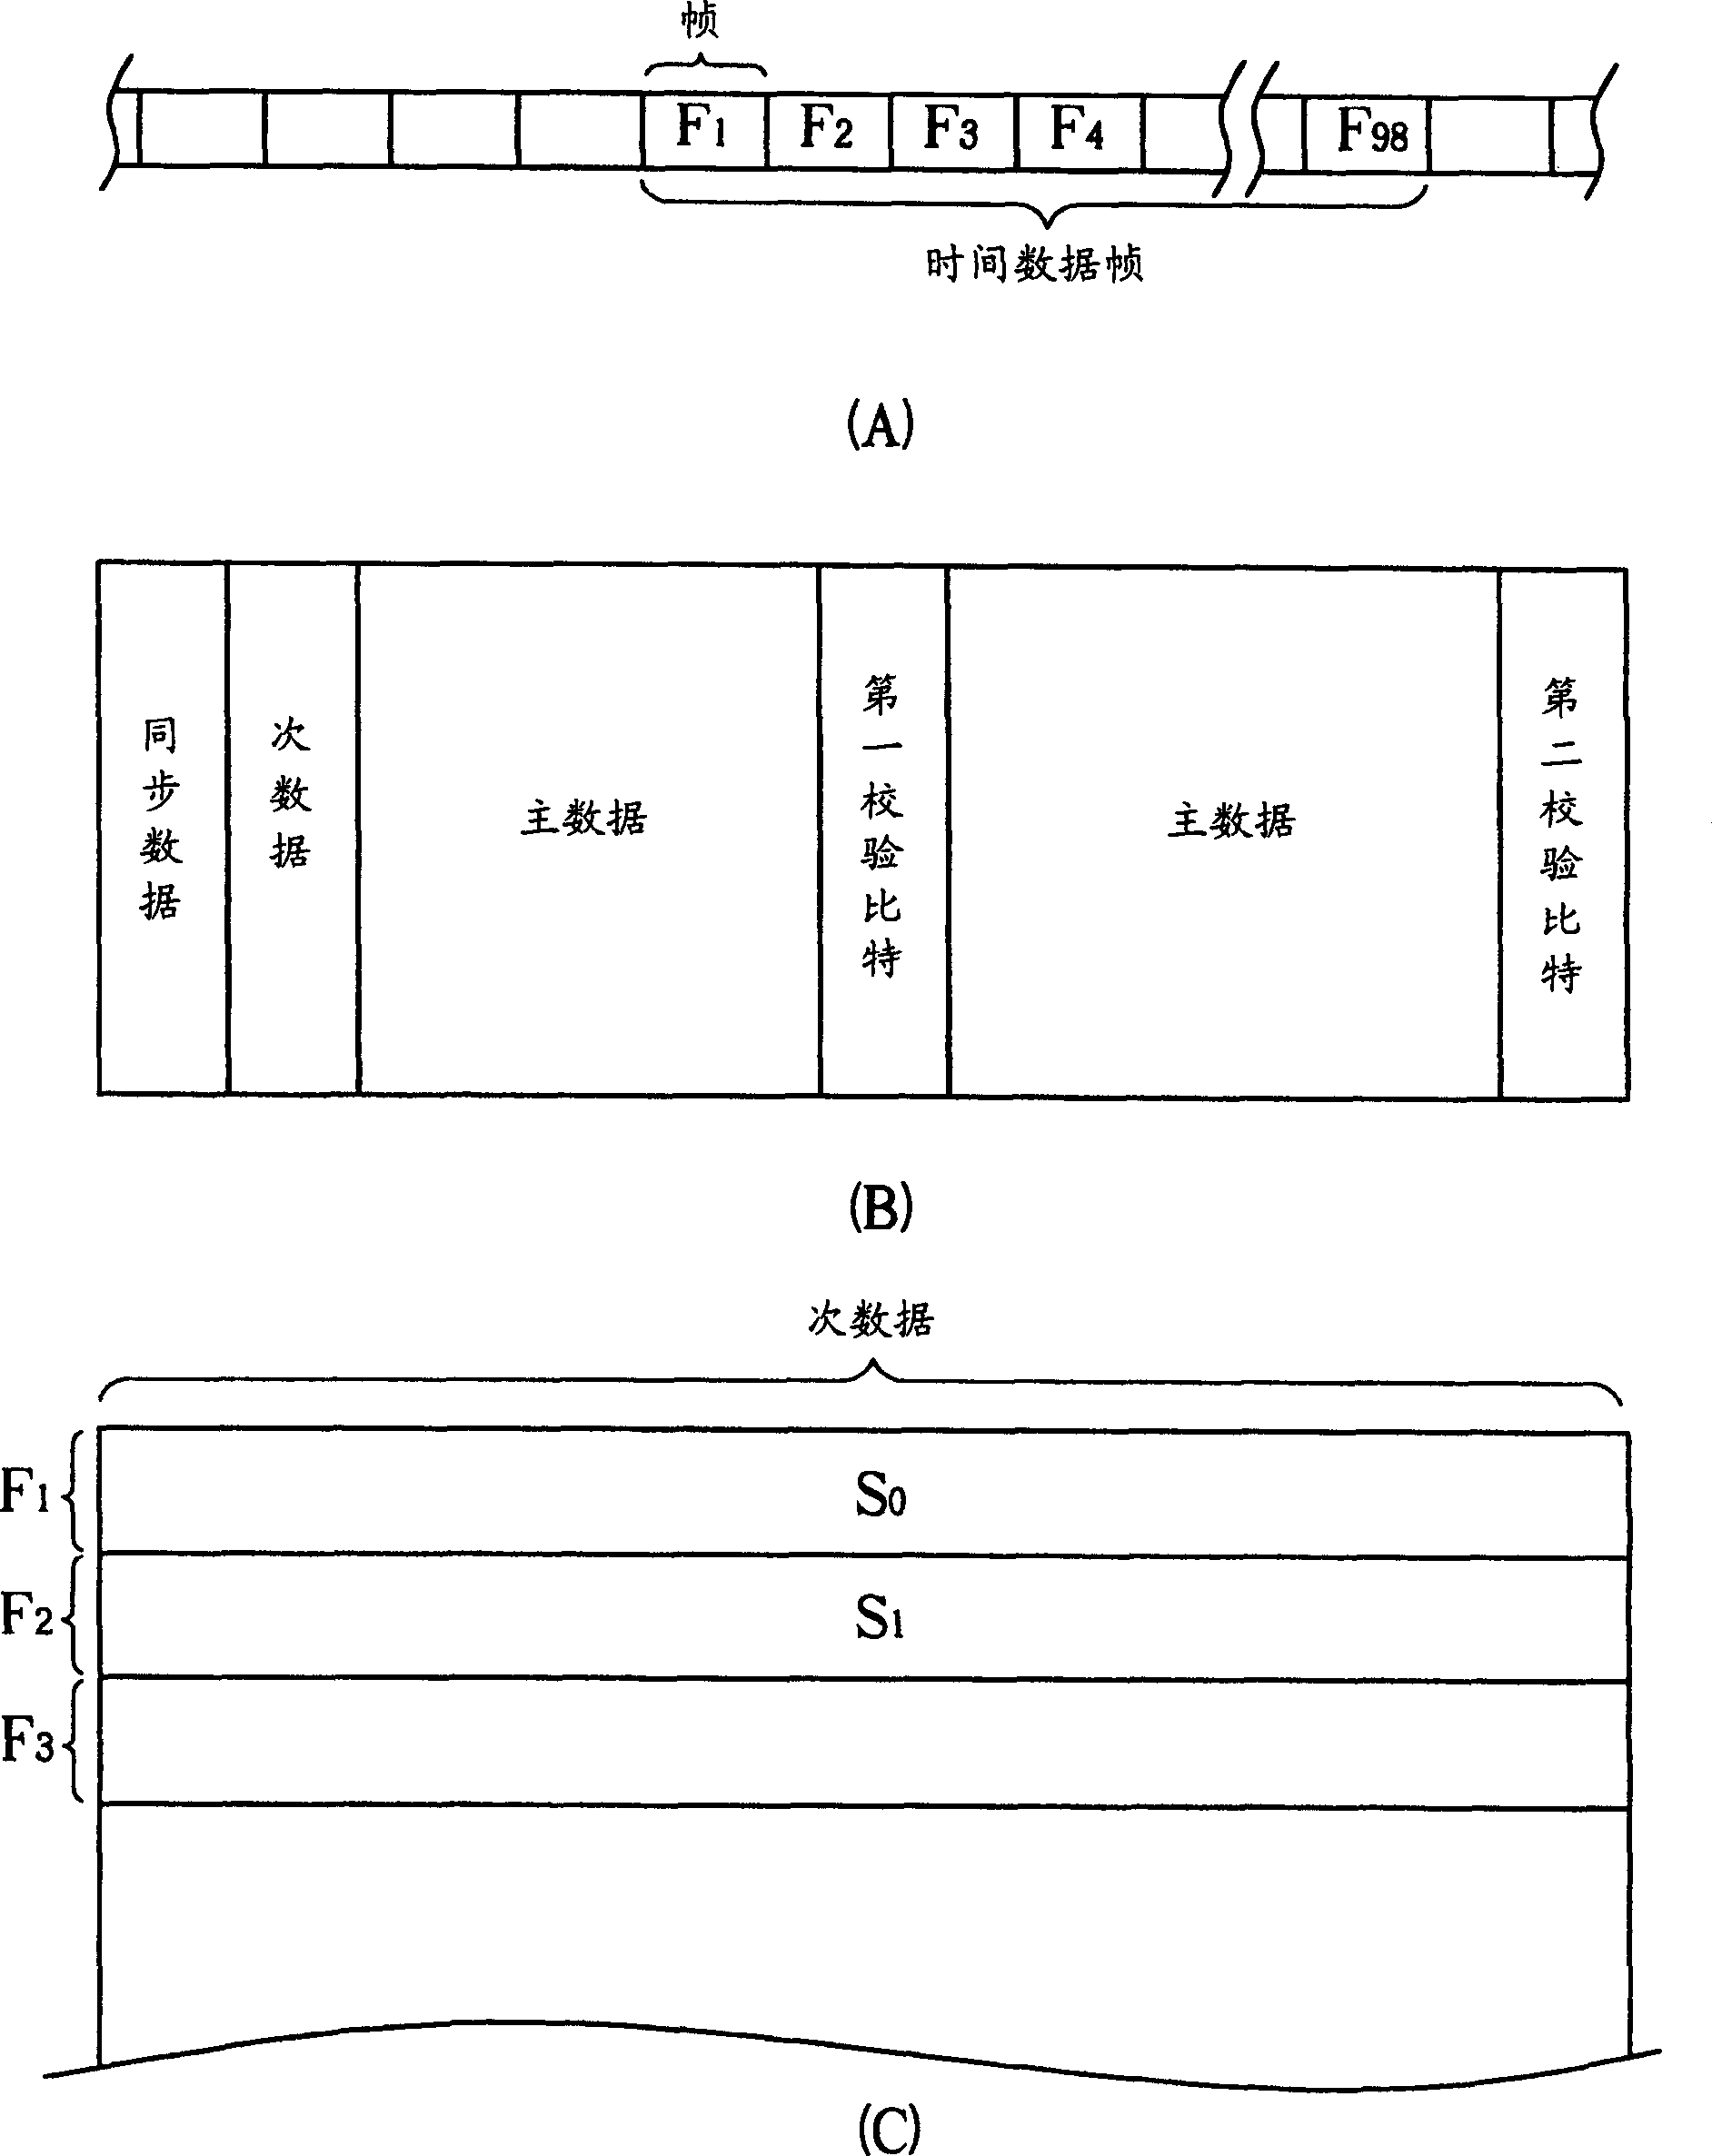 Method and apparatus for generating write-in clock in optical-disc etching machine